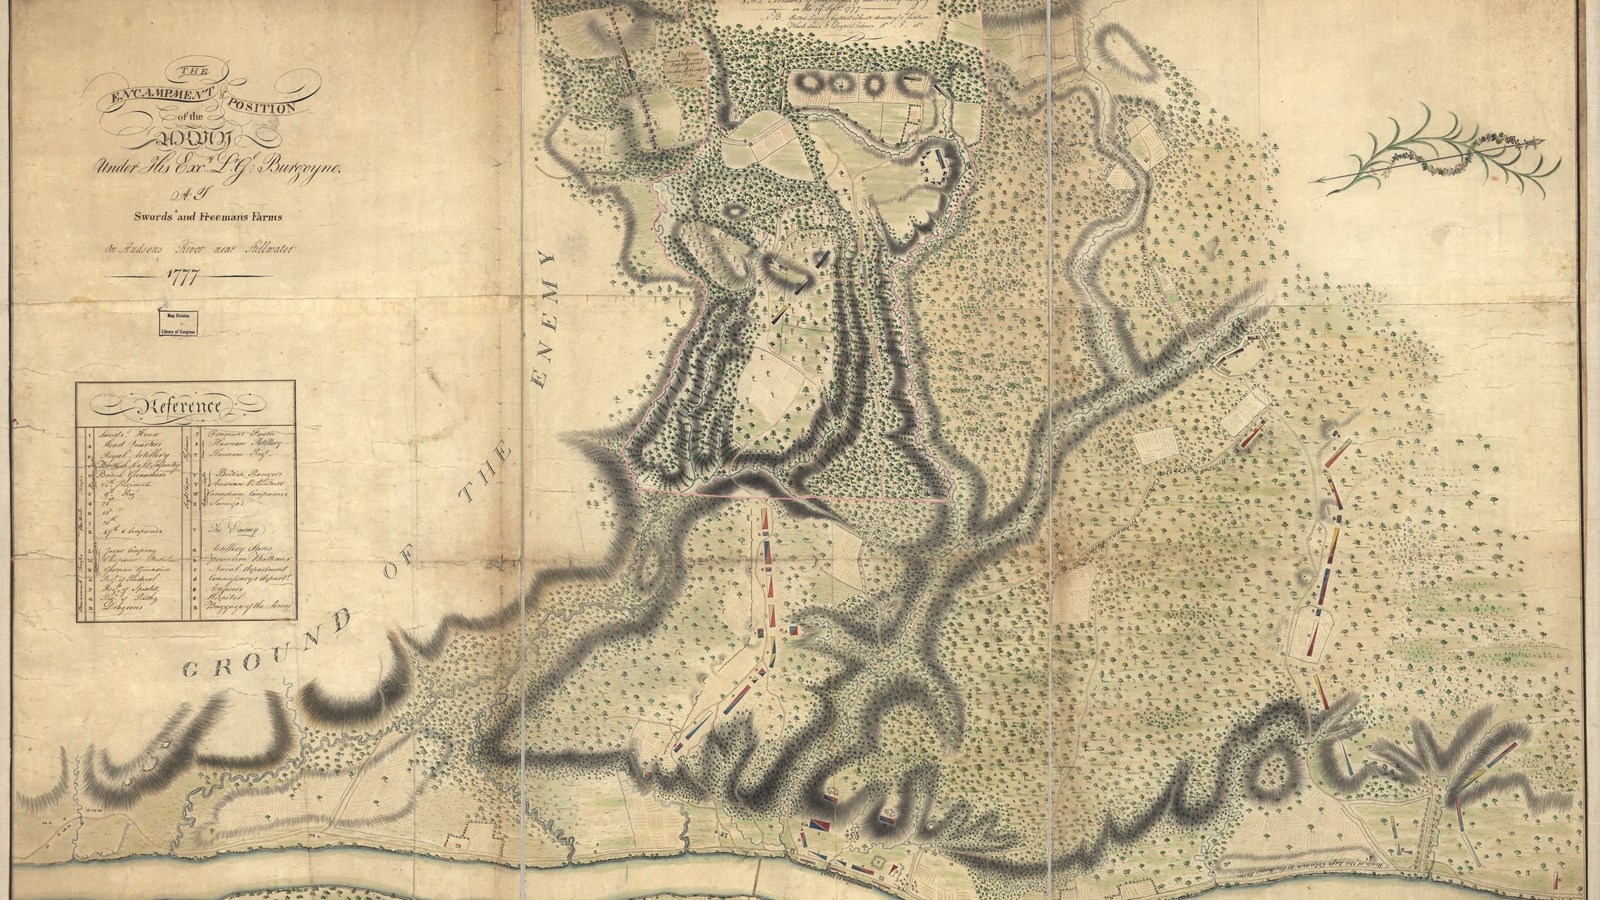 Historic map showing 